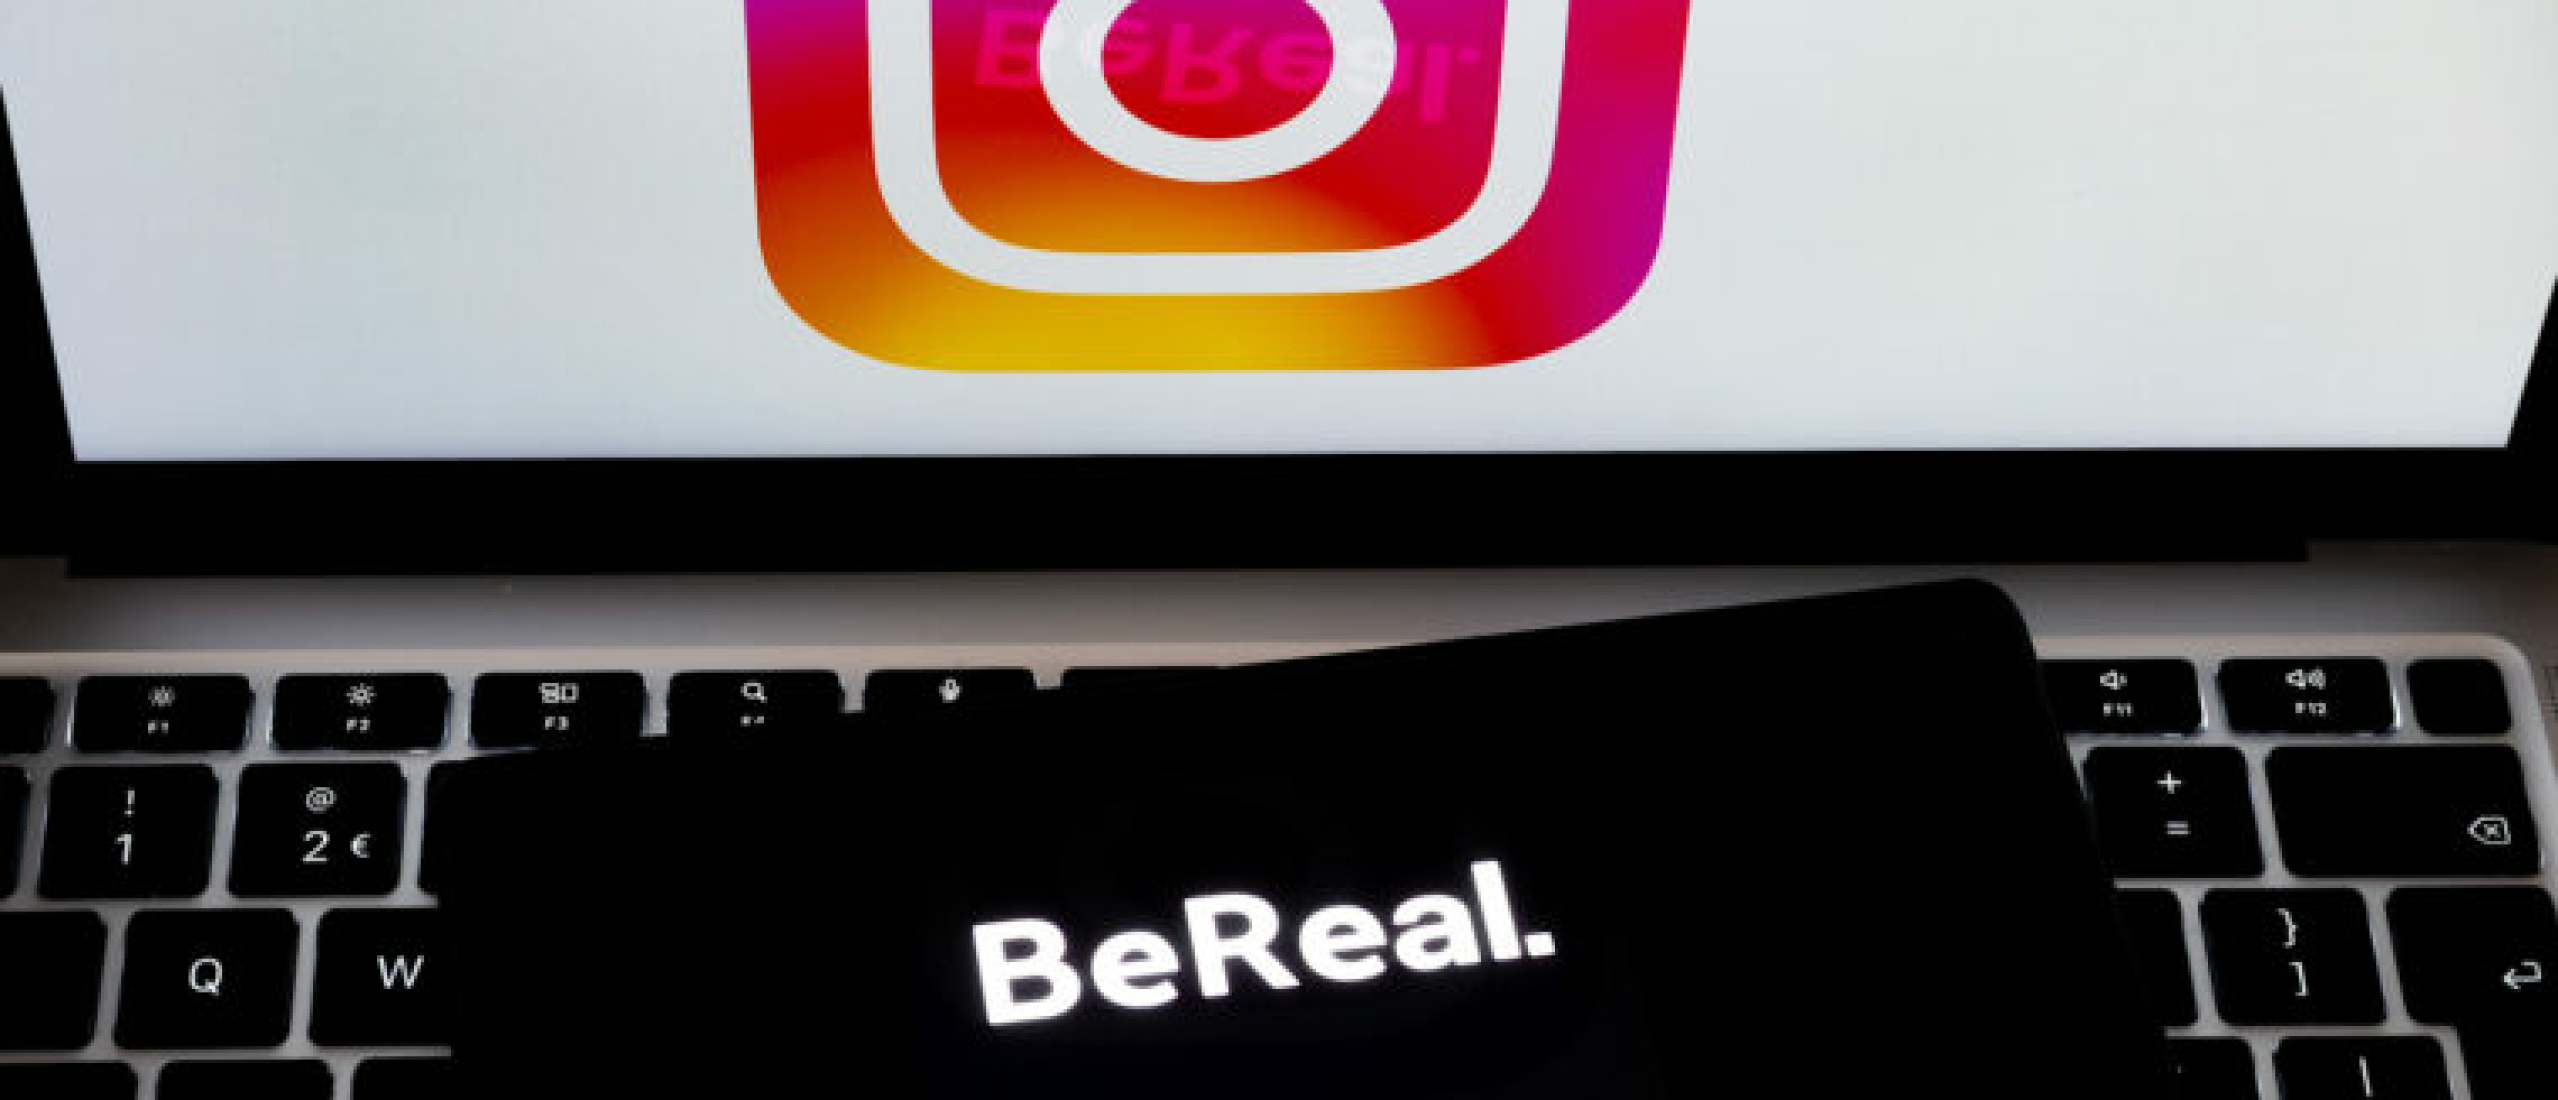 Instagram test BeReal clone ‘Candid Challenges’